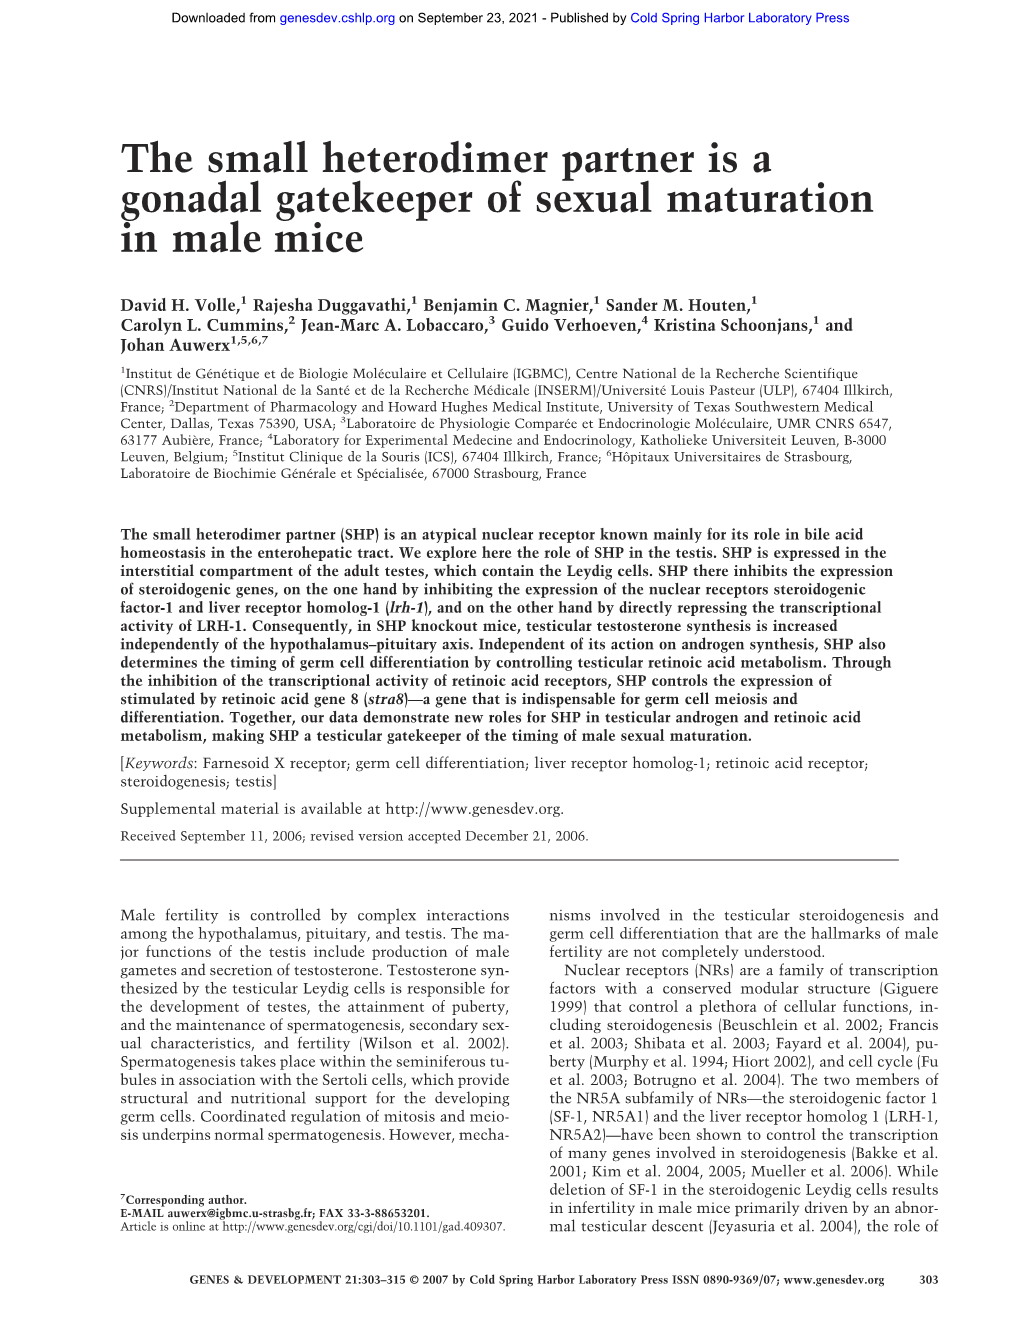 The Small Heterodimer Partner Is a Gonadal Gatekeeper of Sexual Maturation in Male Mice